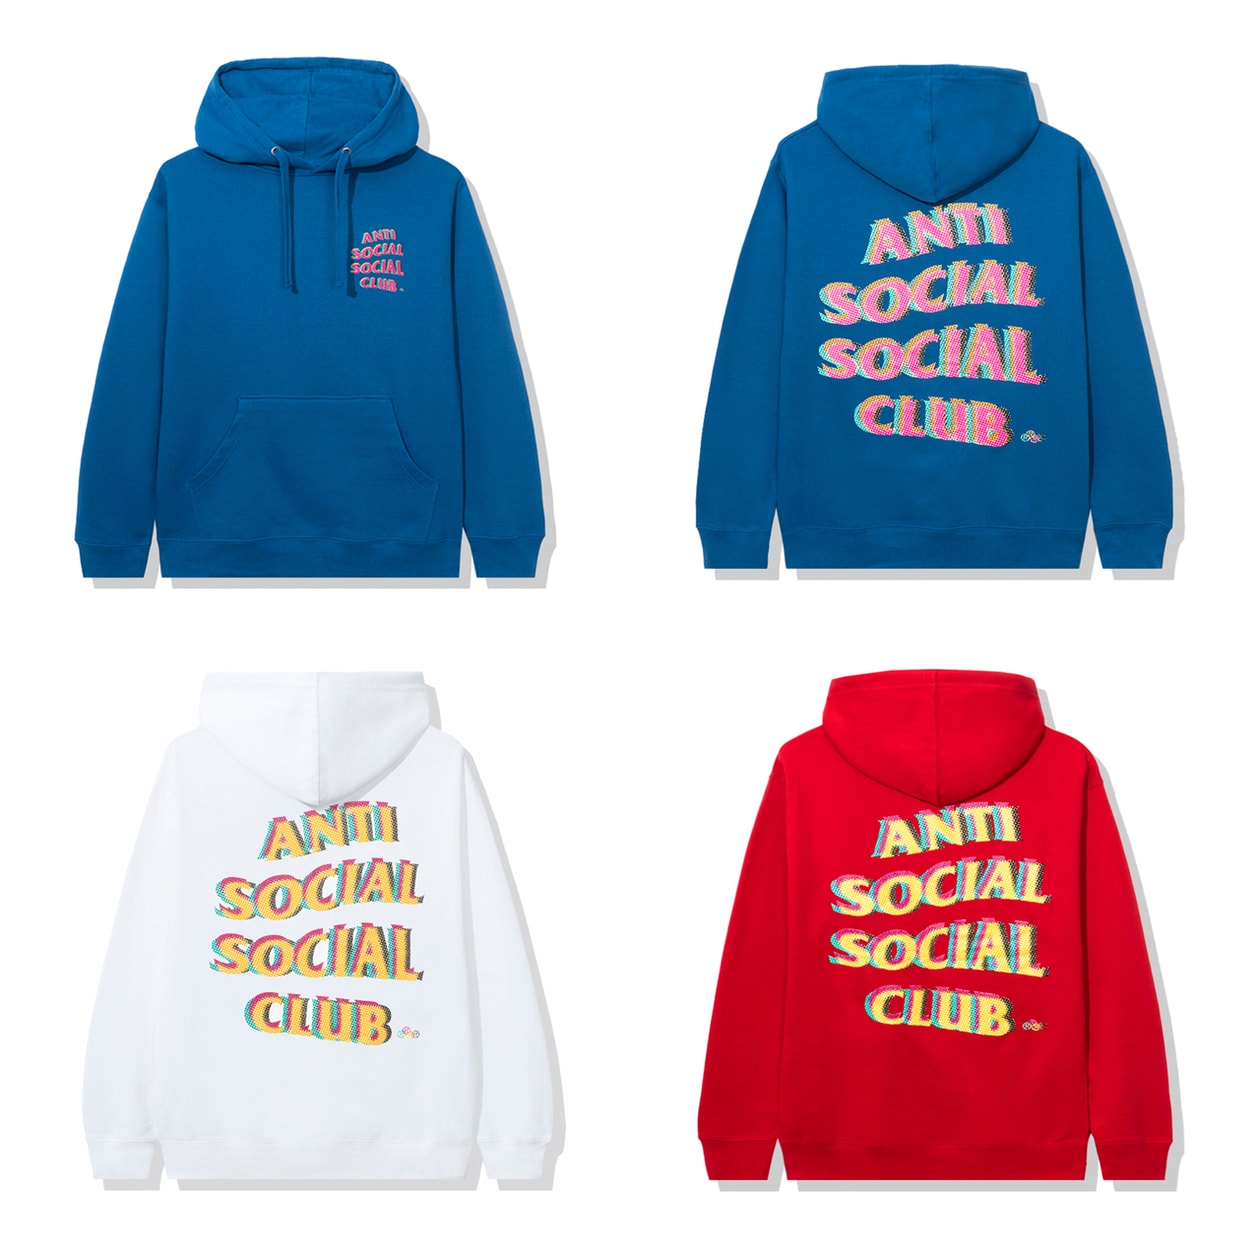 Cactus Plant Flea Market, UNDEFEATED x Anti Social Social Club collaboration collections fall winter 2020 release date info buy august 1